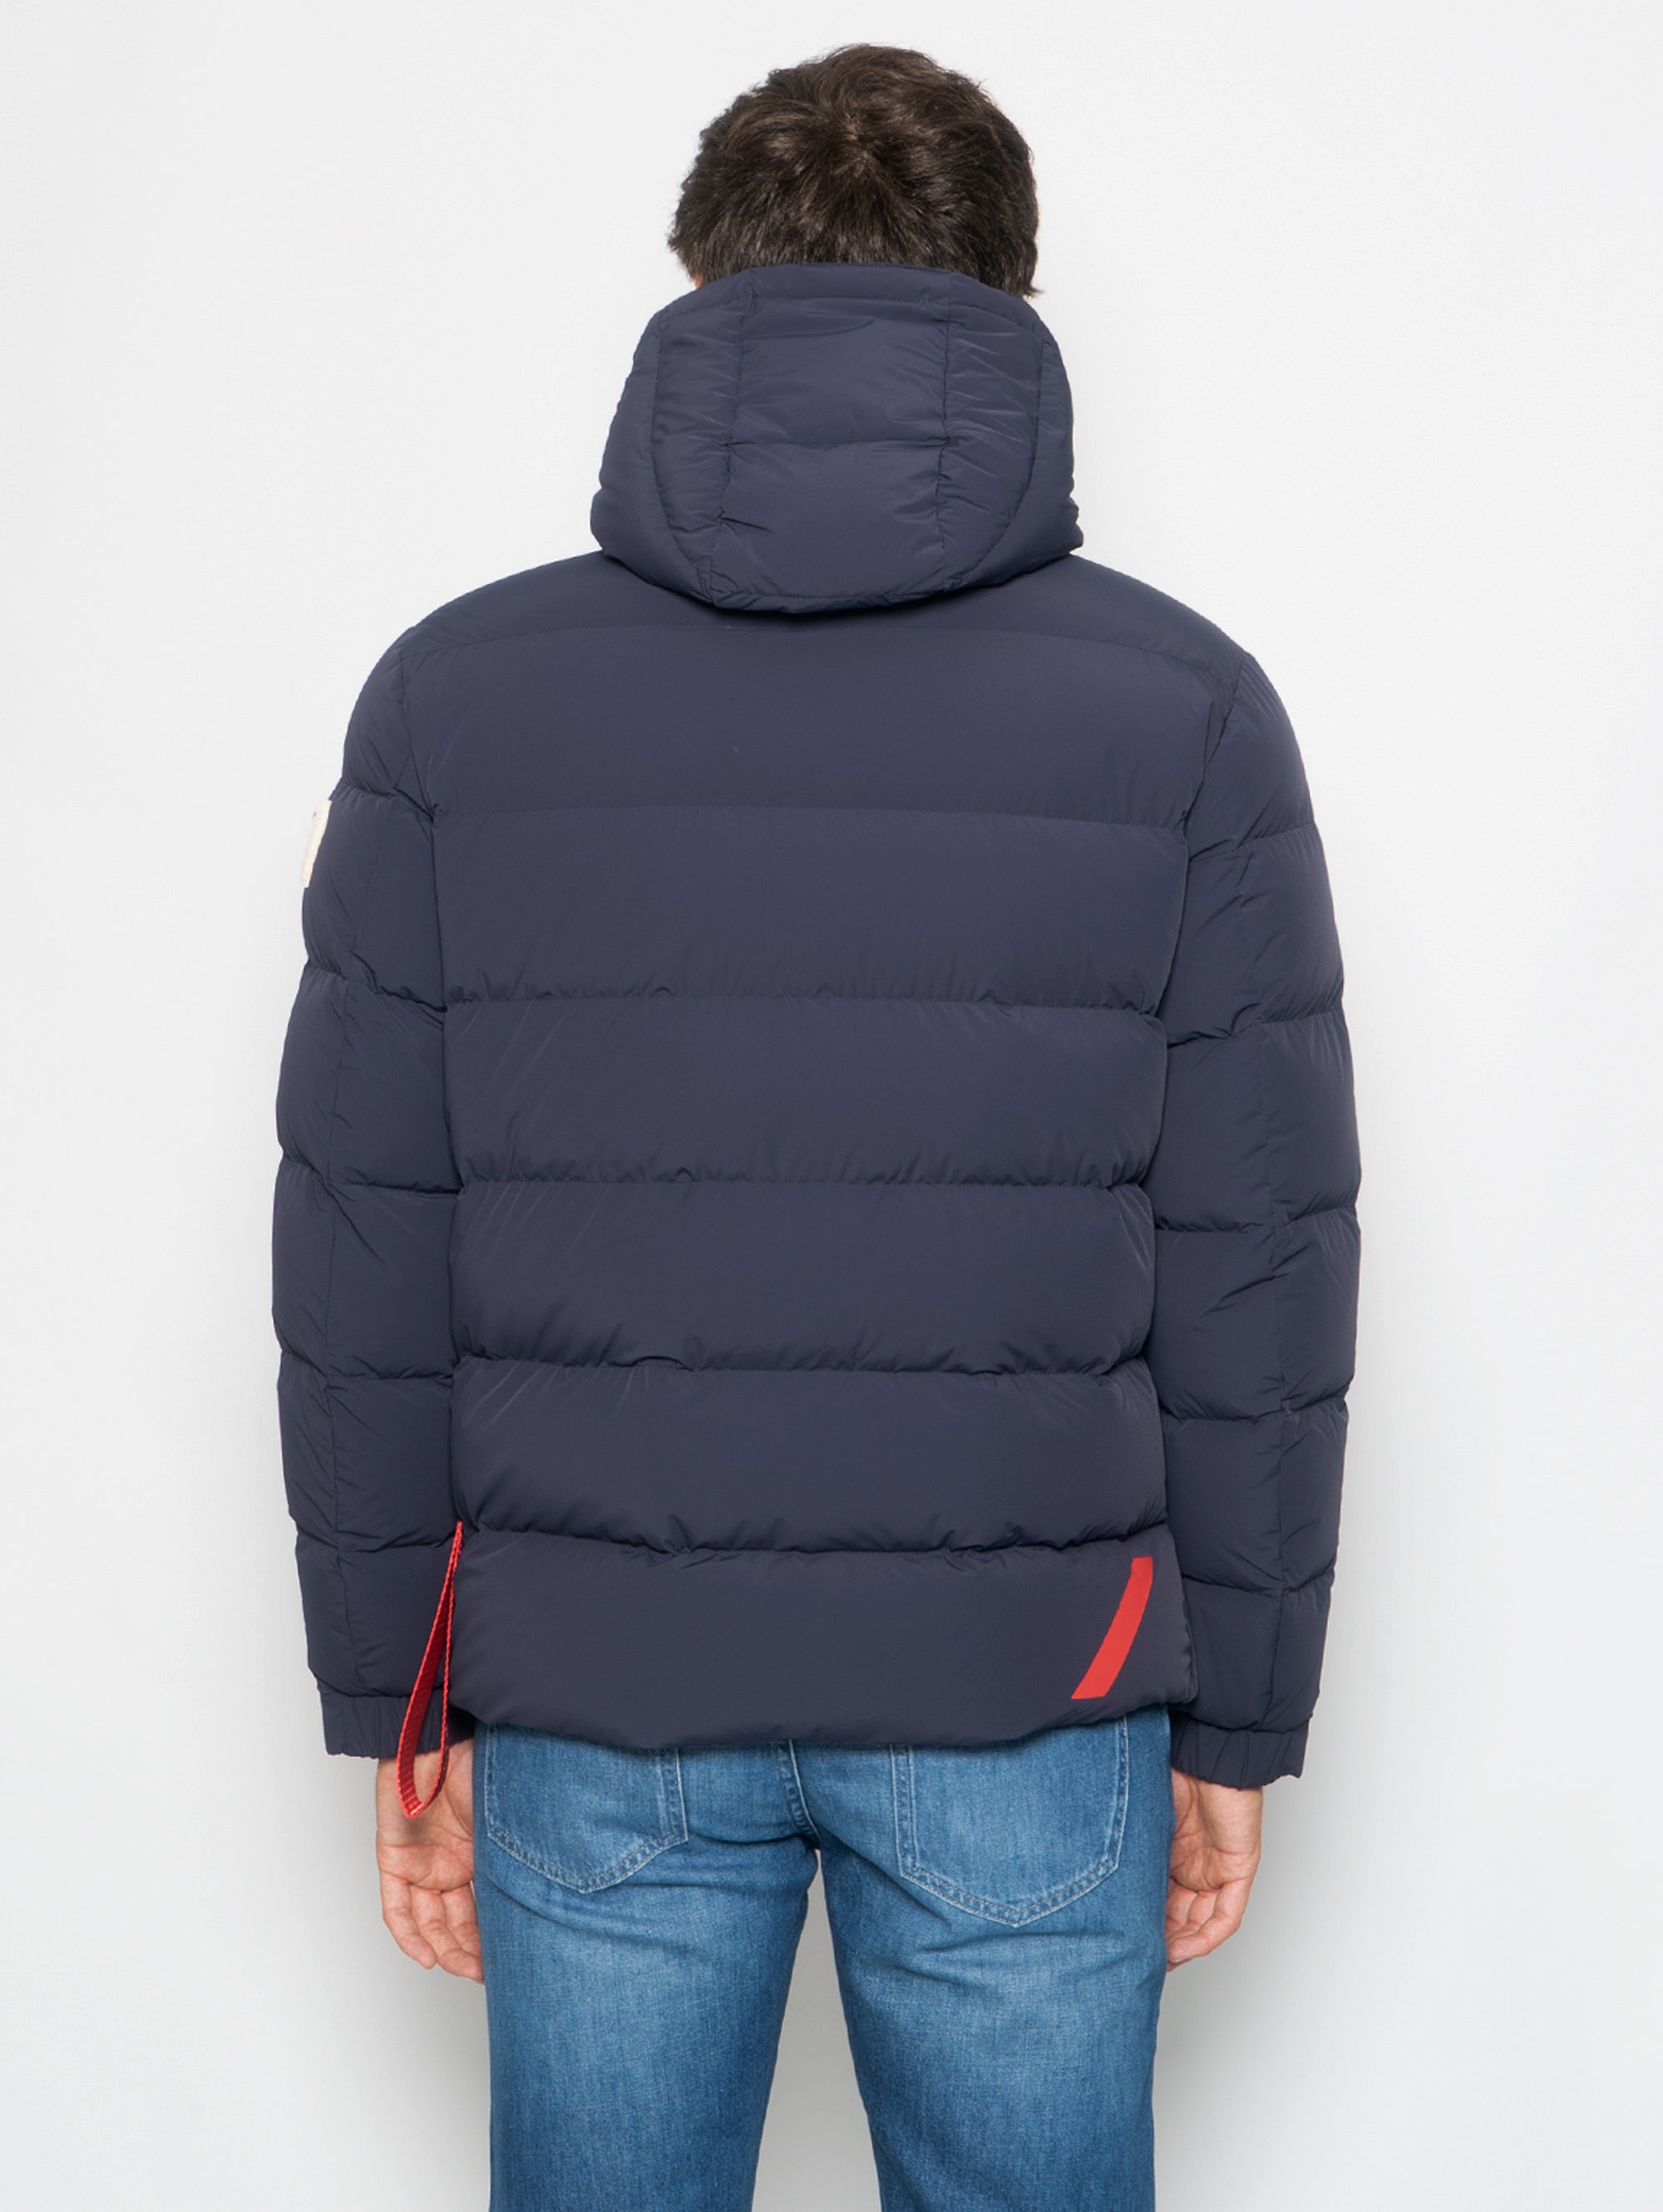 Short down jacket with hood in matte blue nylon